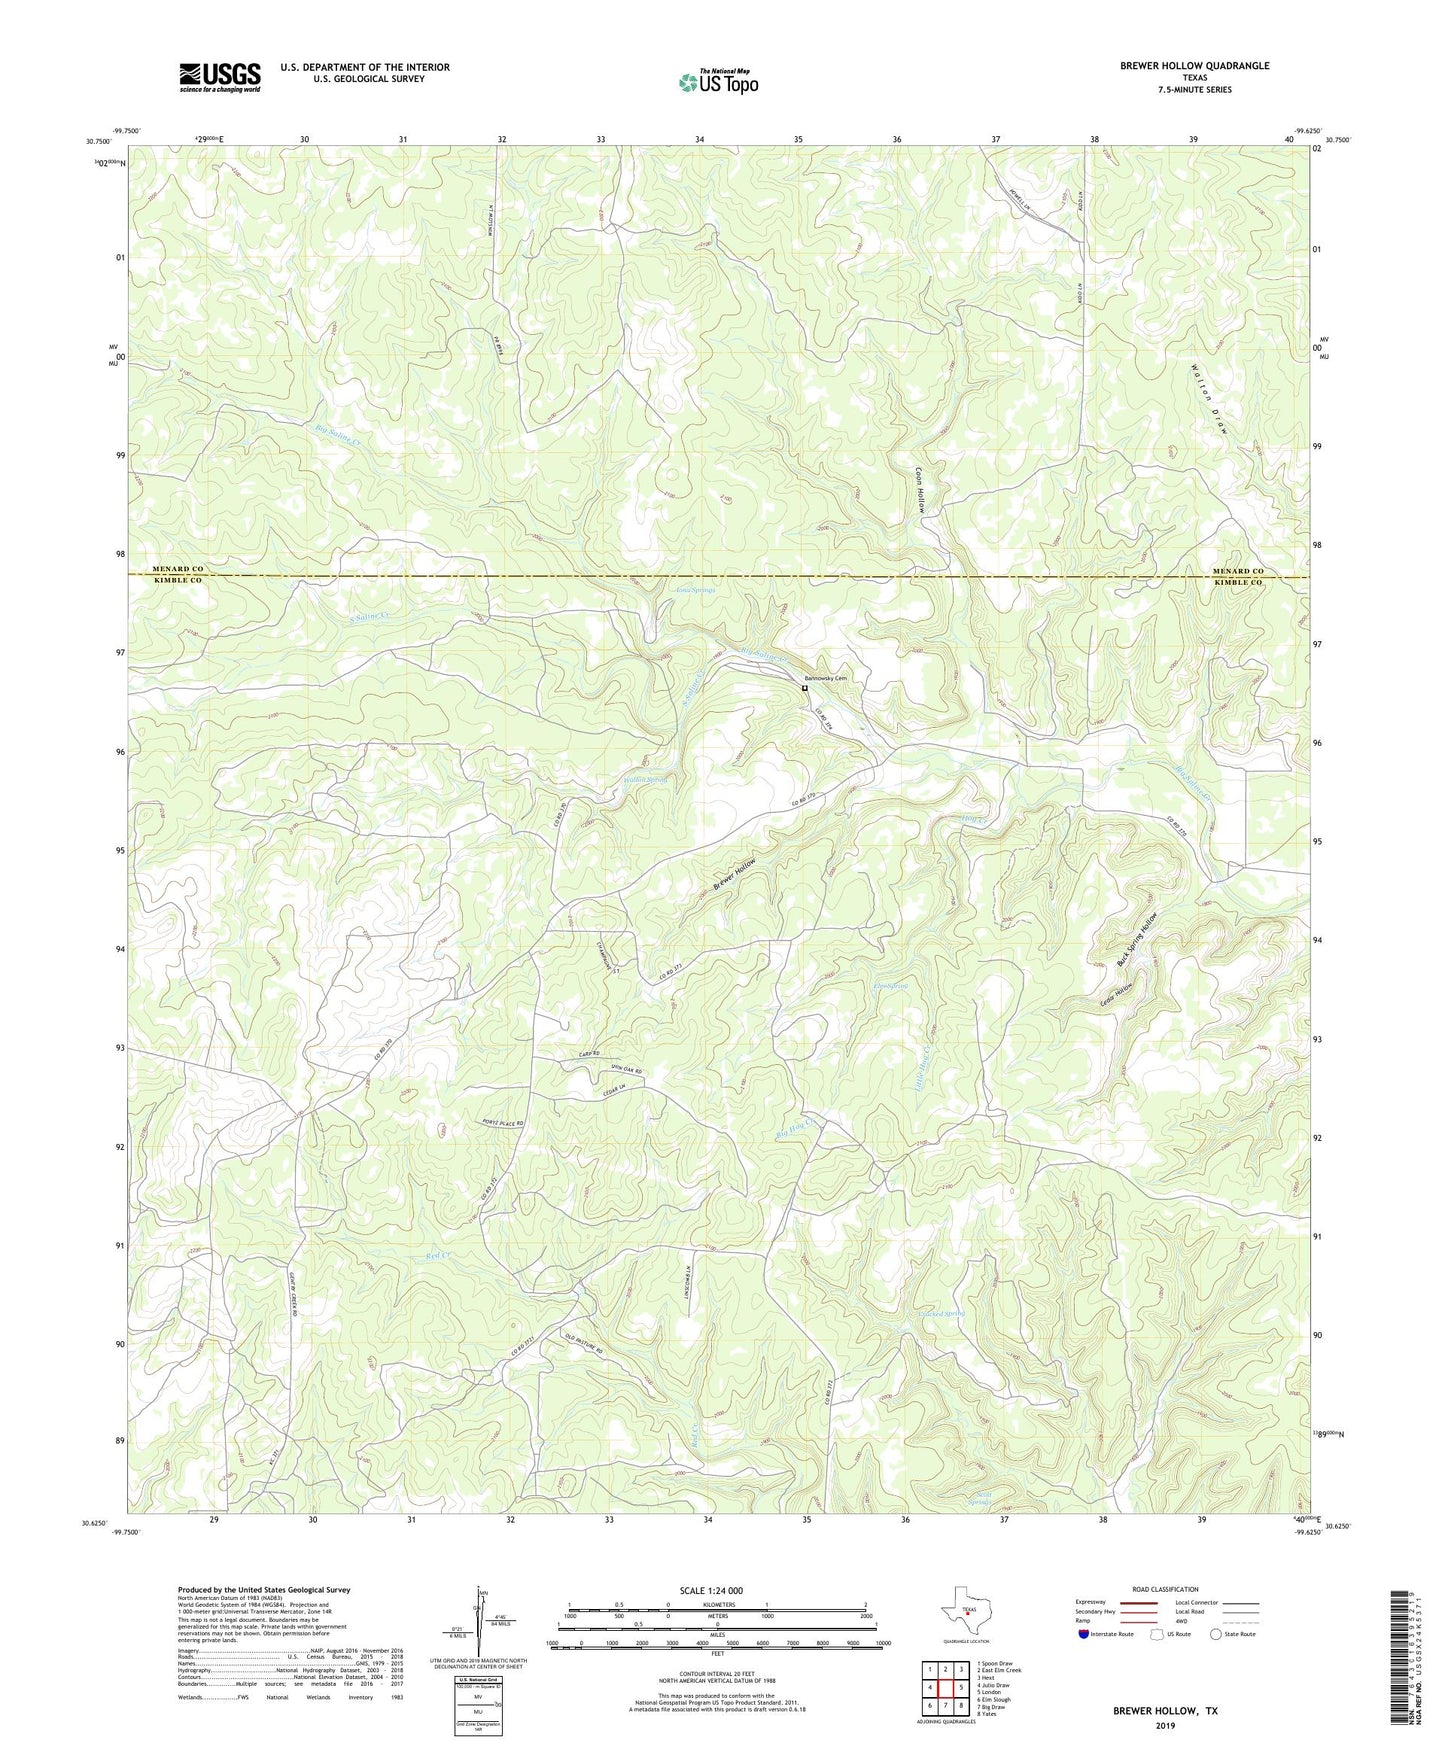 Brewer Hollow Texas US Topo Map Image